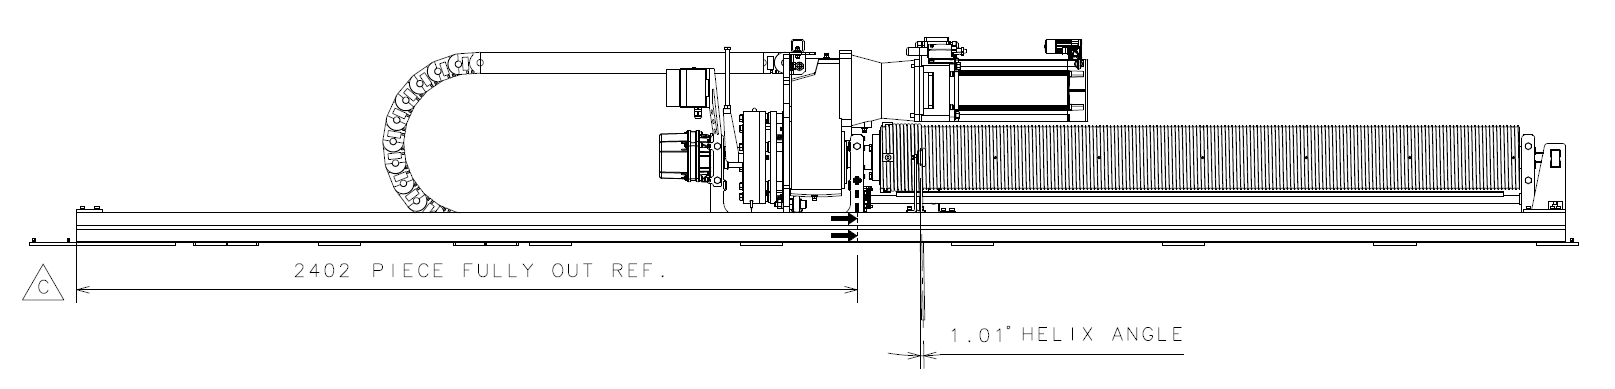 BT2-300-1_dim_4_front_view.png